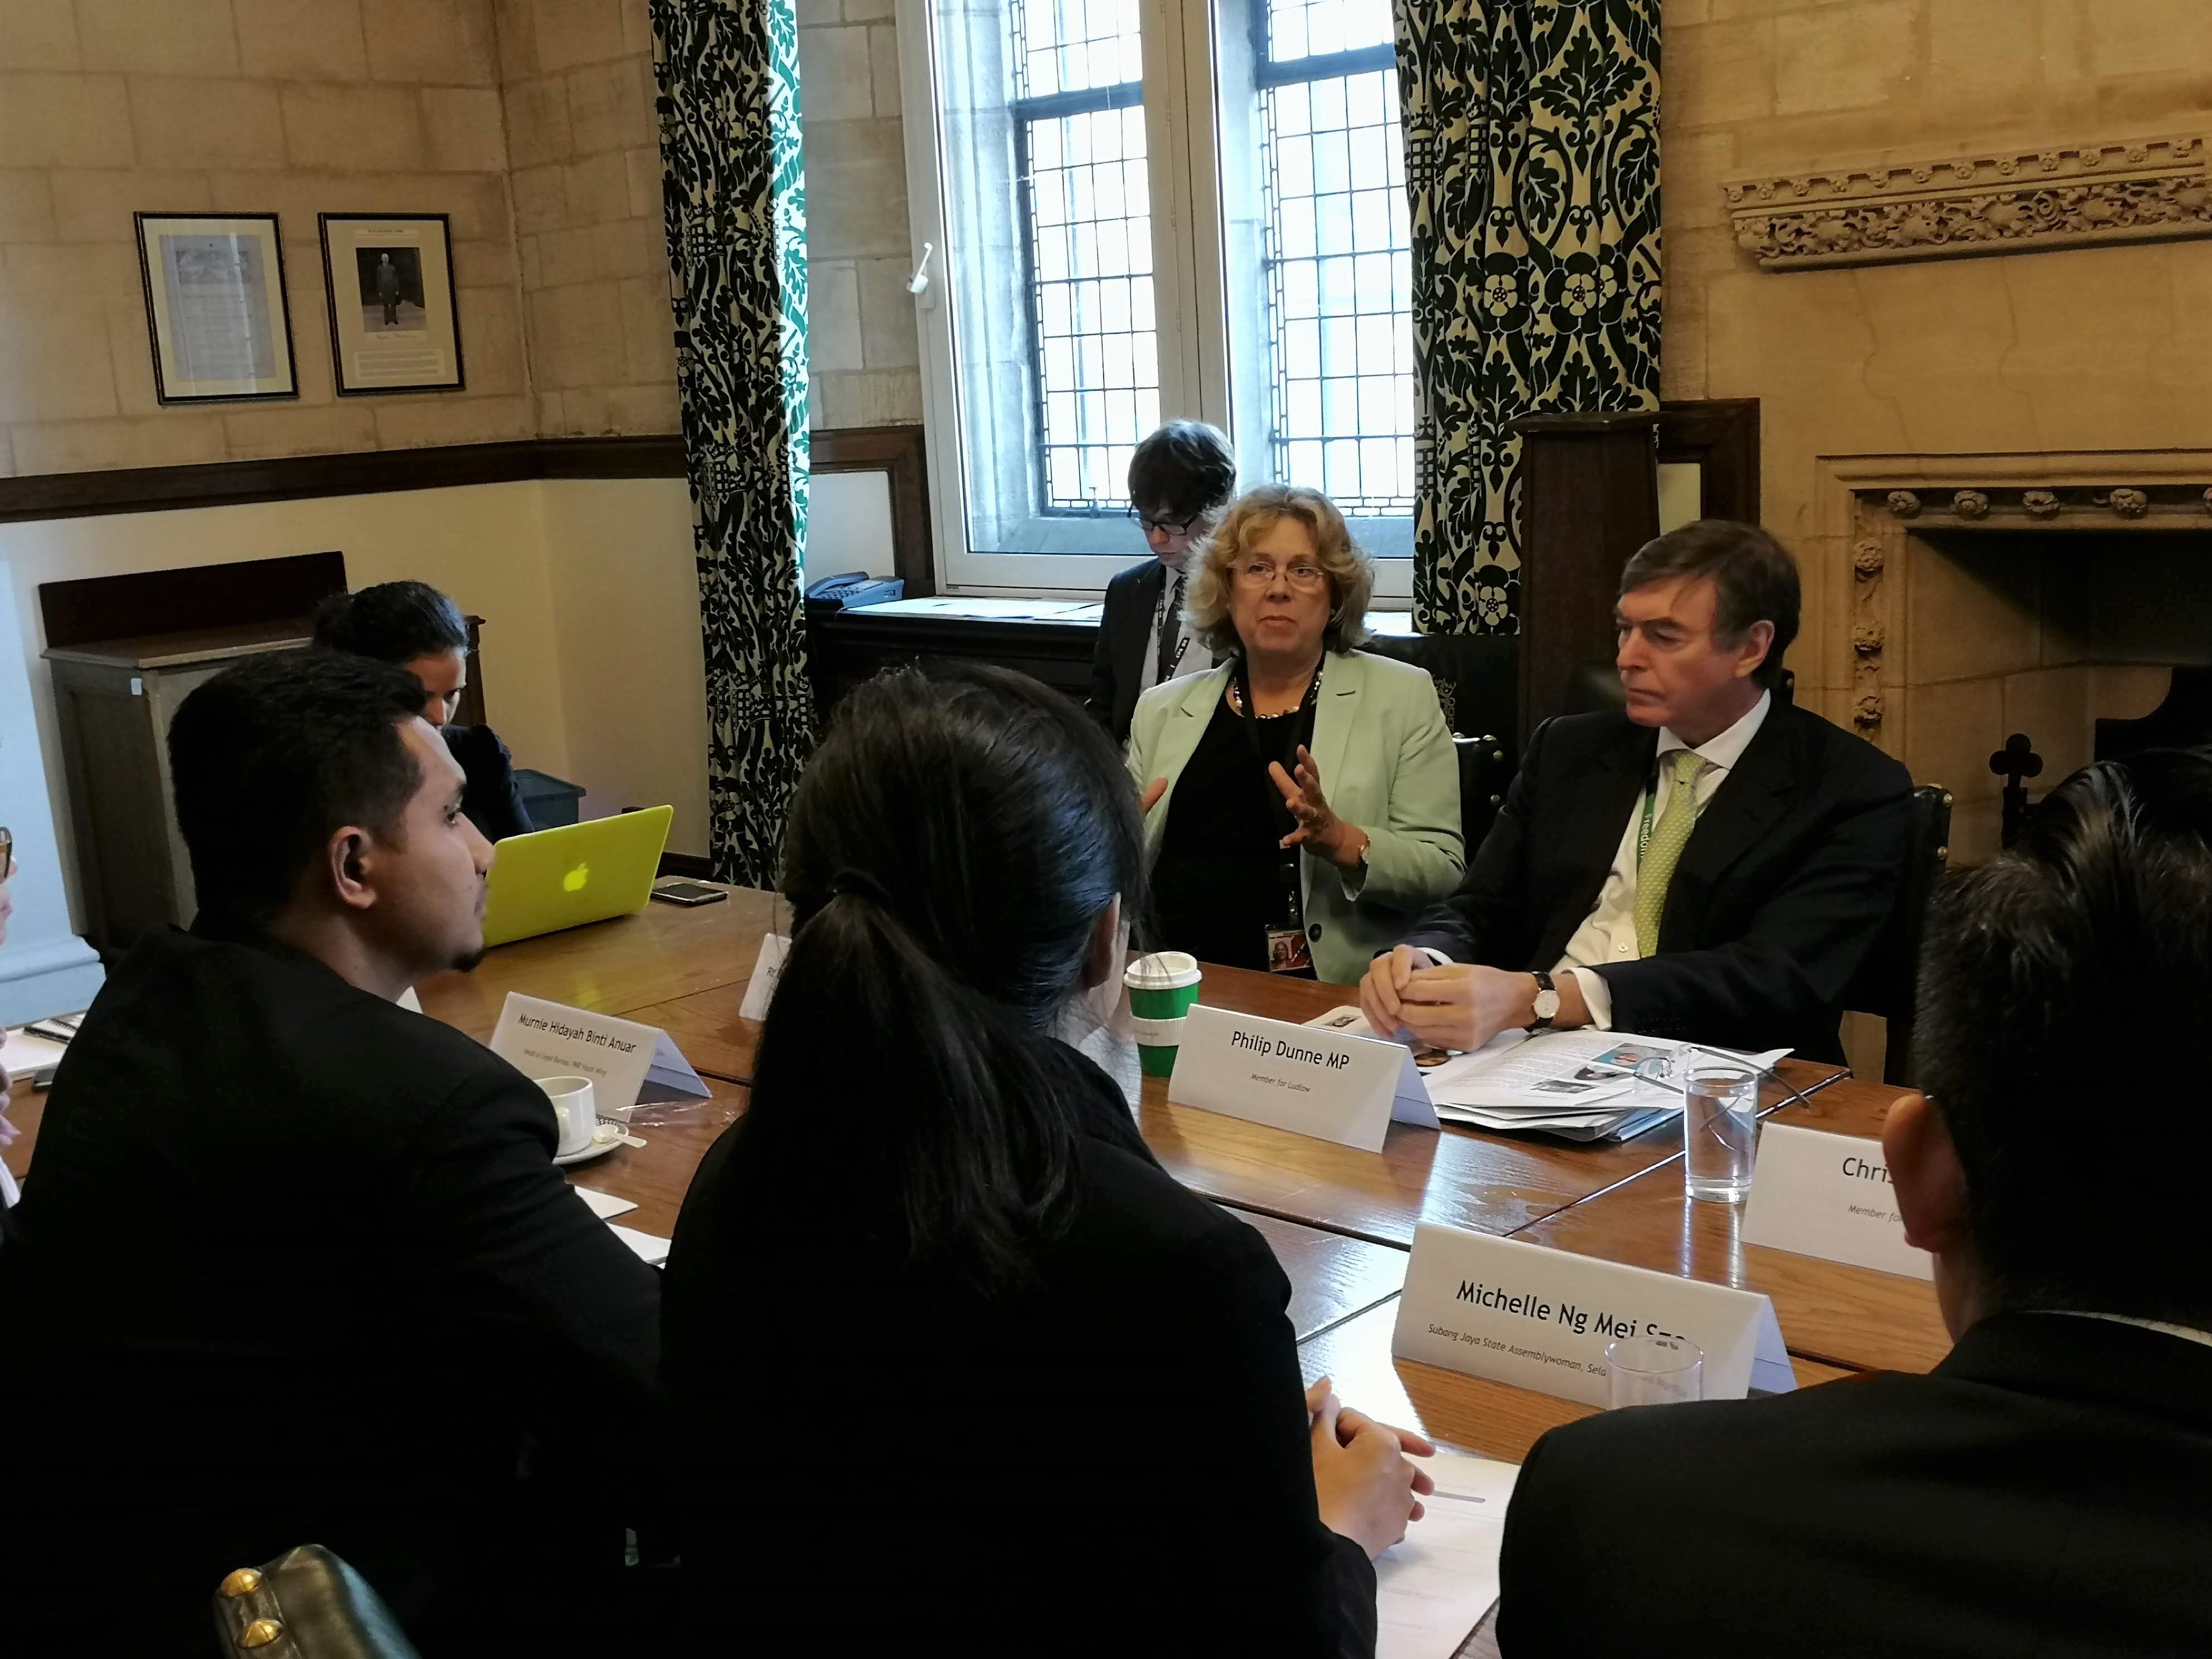 The Rt Hon. the Baroness Northover and Philip Dunne MP in conversation with the delegation